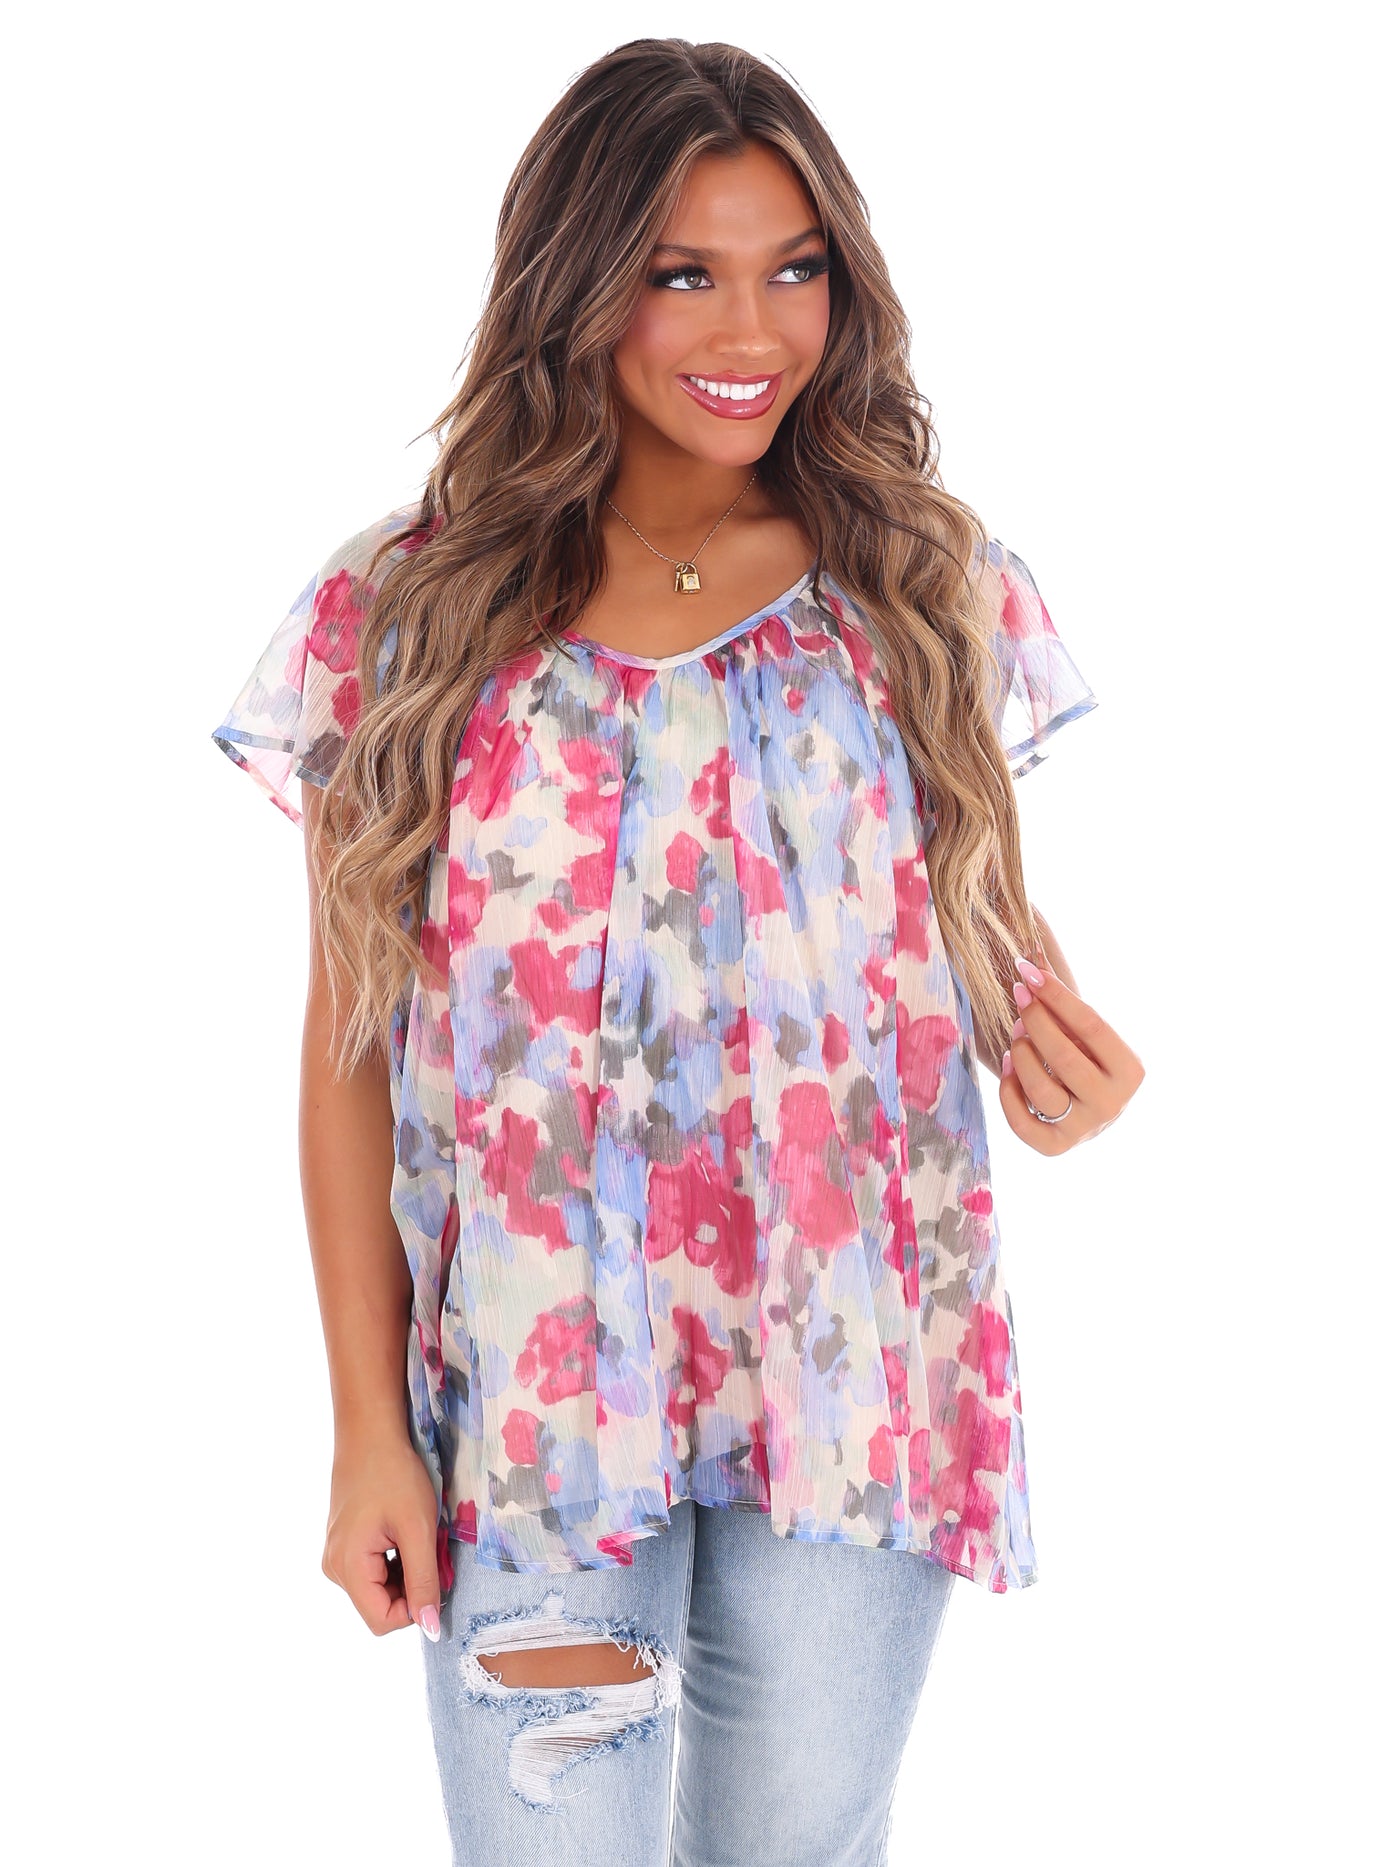 What About Us Floral Tunic Top